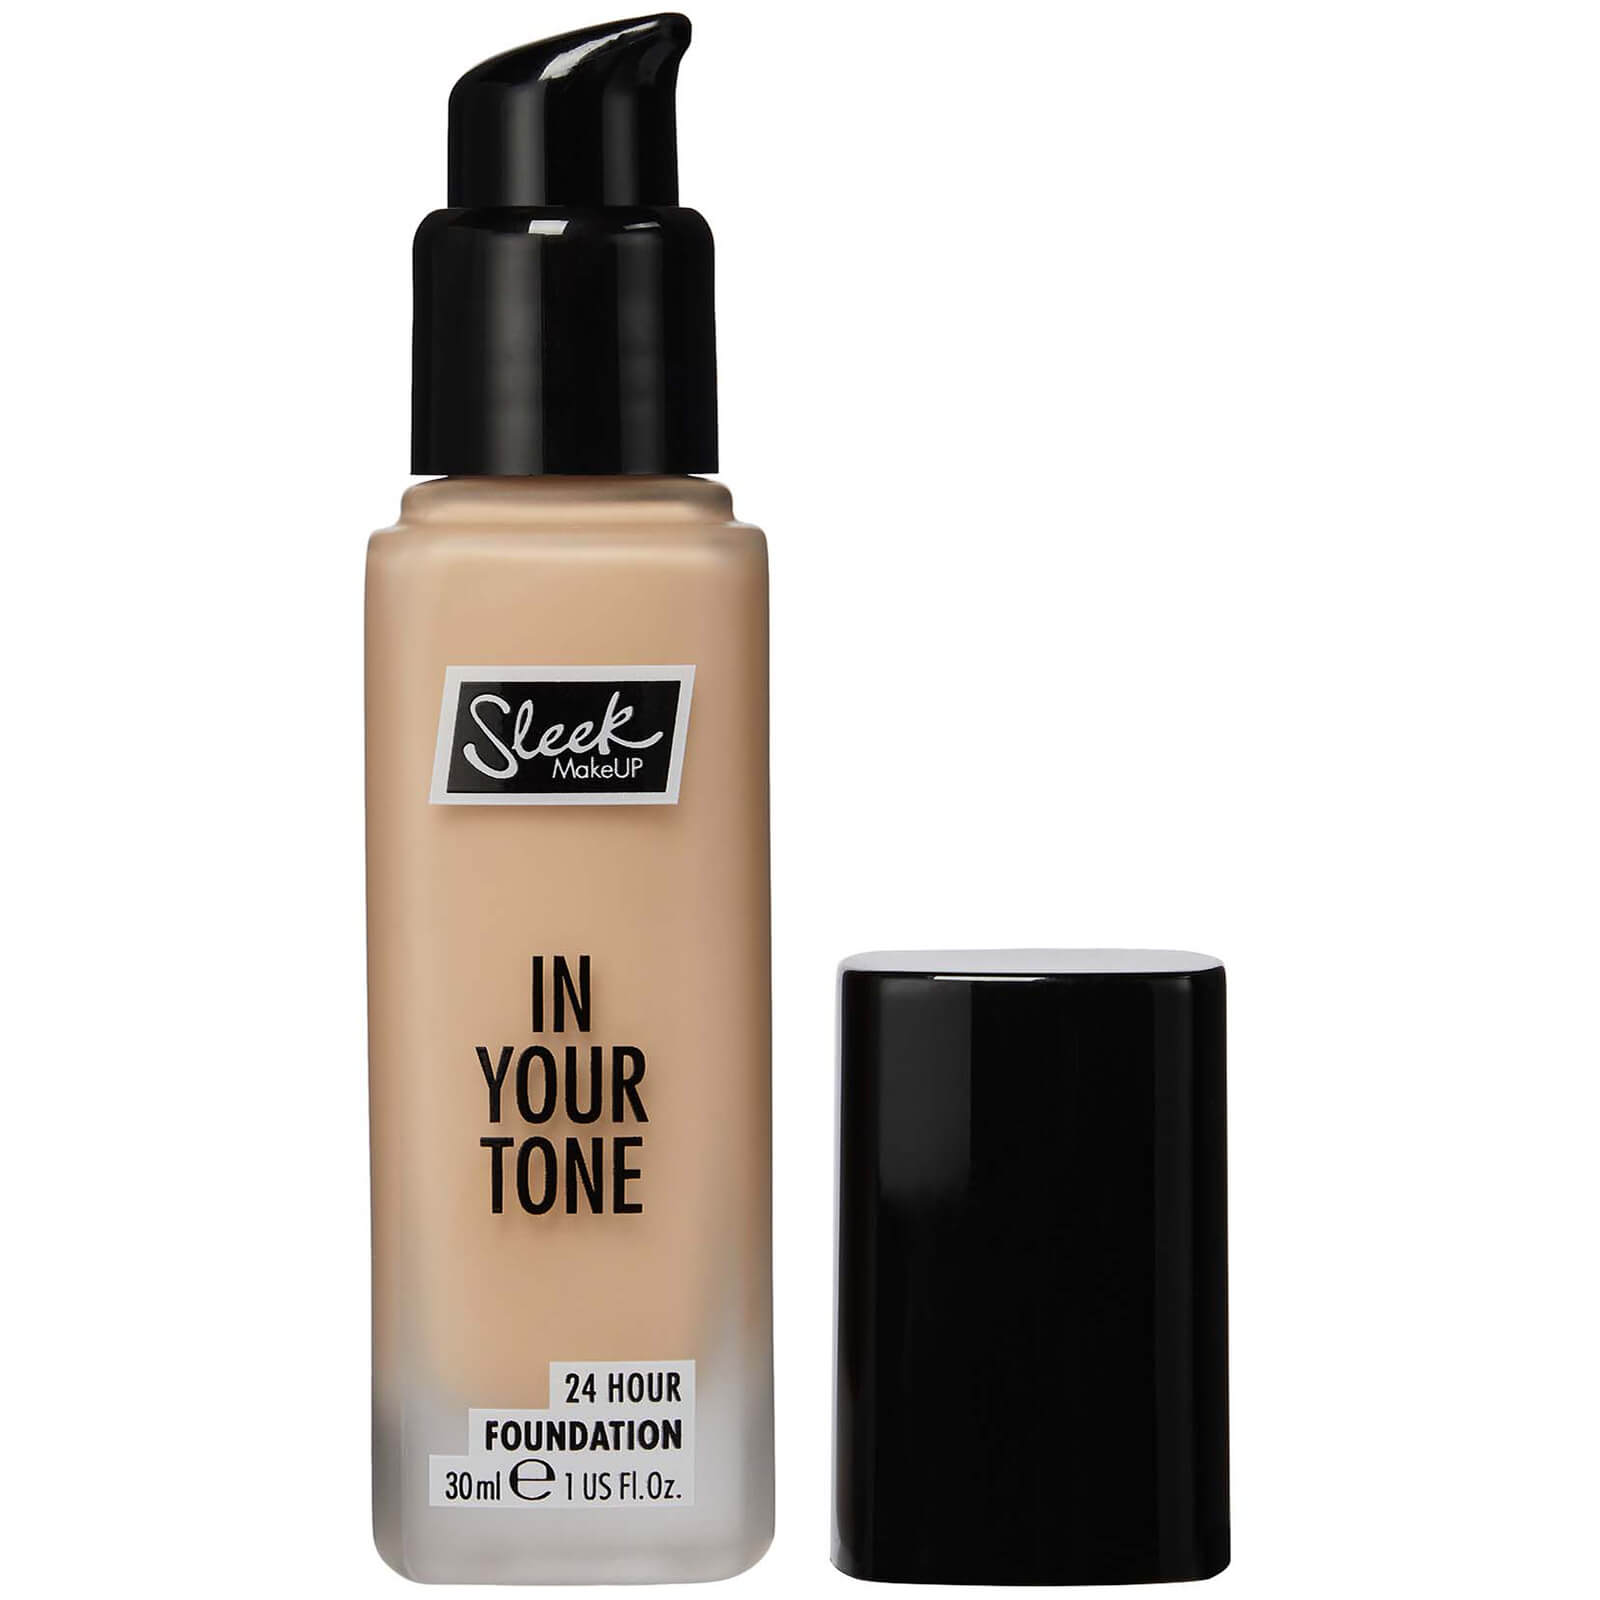 Sleek MakeUP in Your Tone 24 Hour Foundation 30ml (Various Shades) - 3W